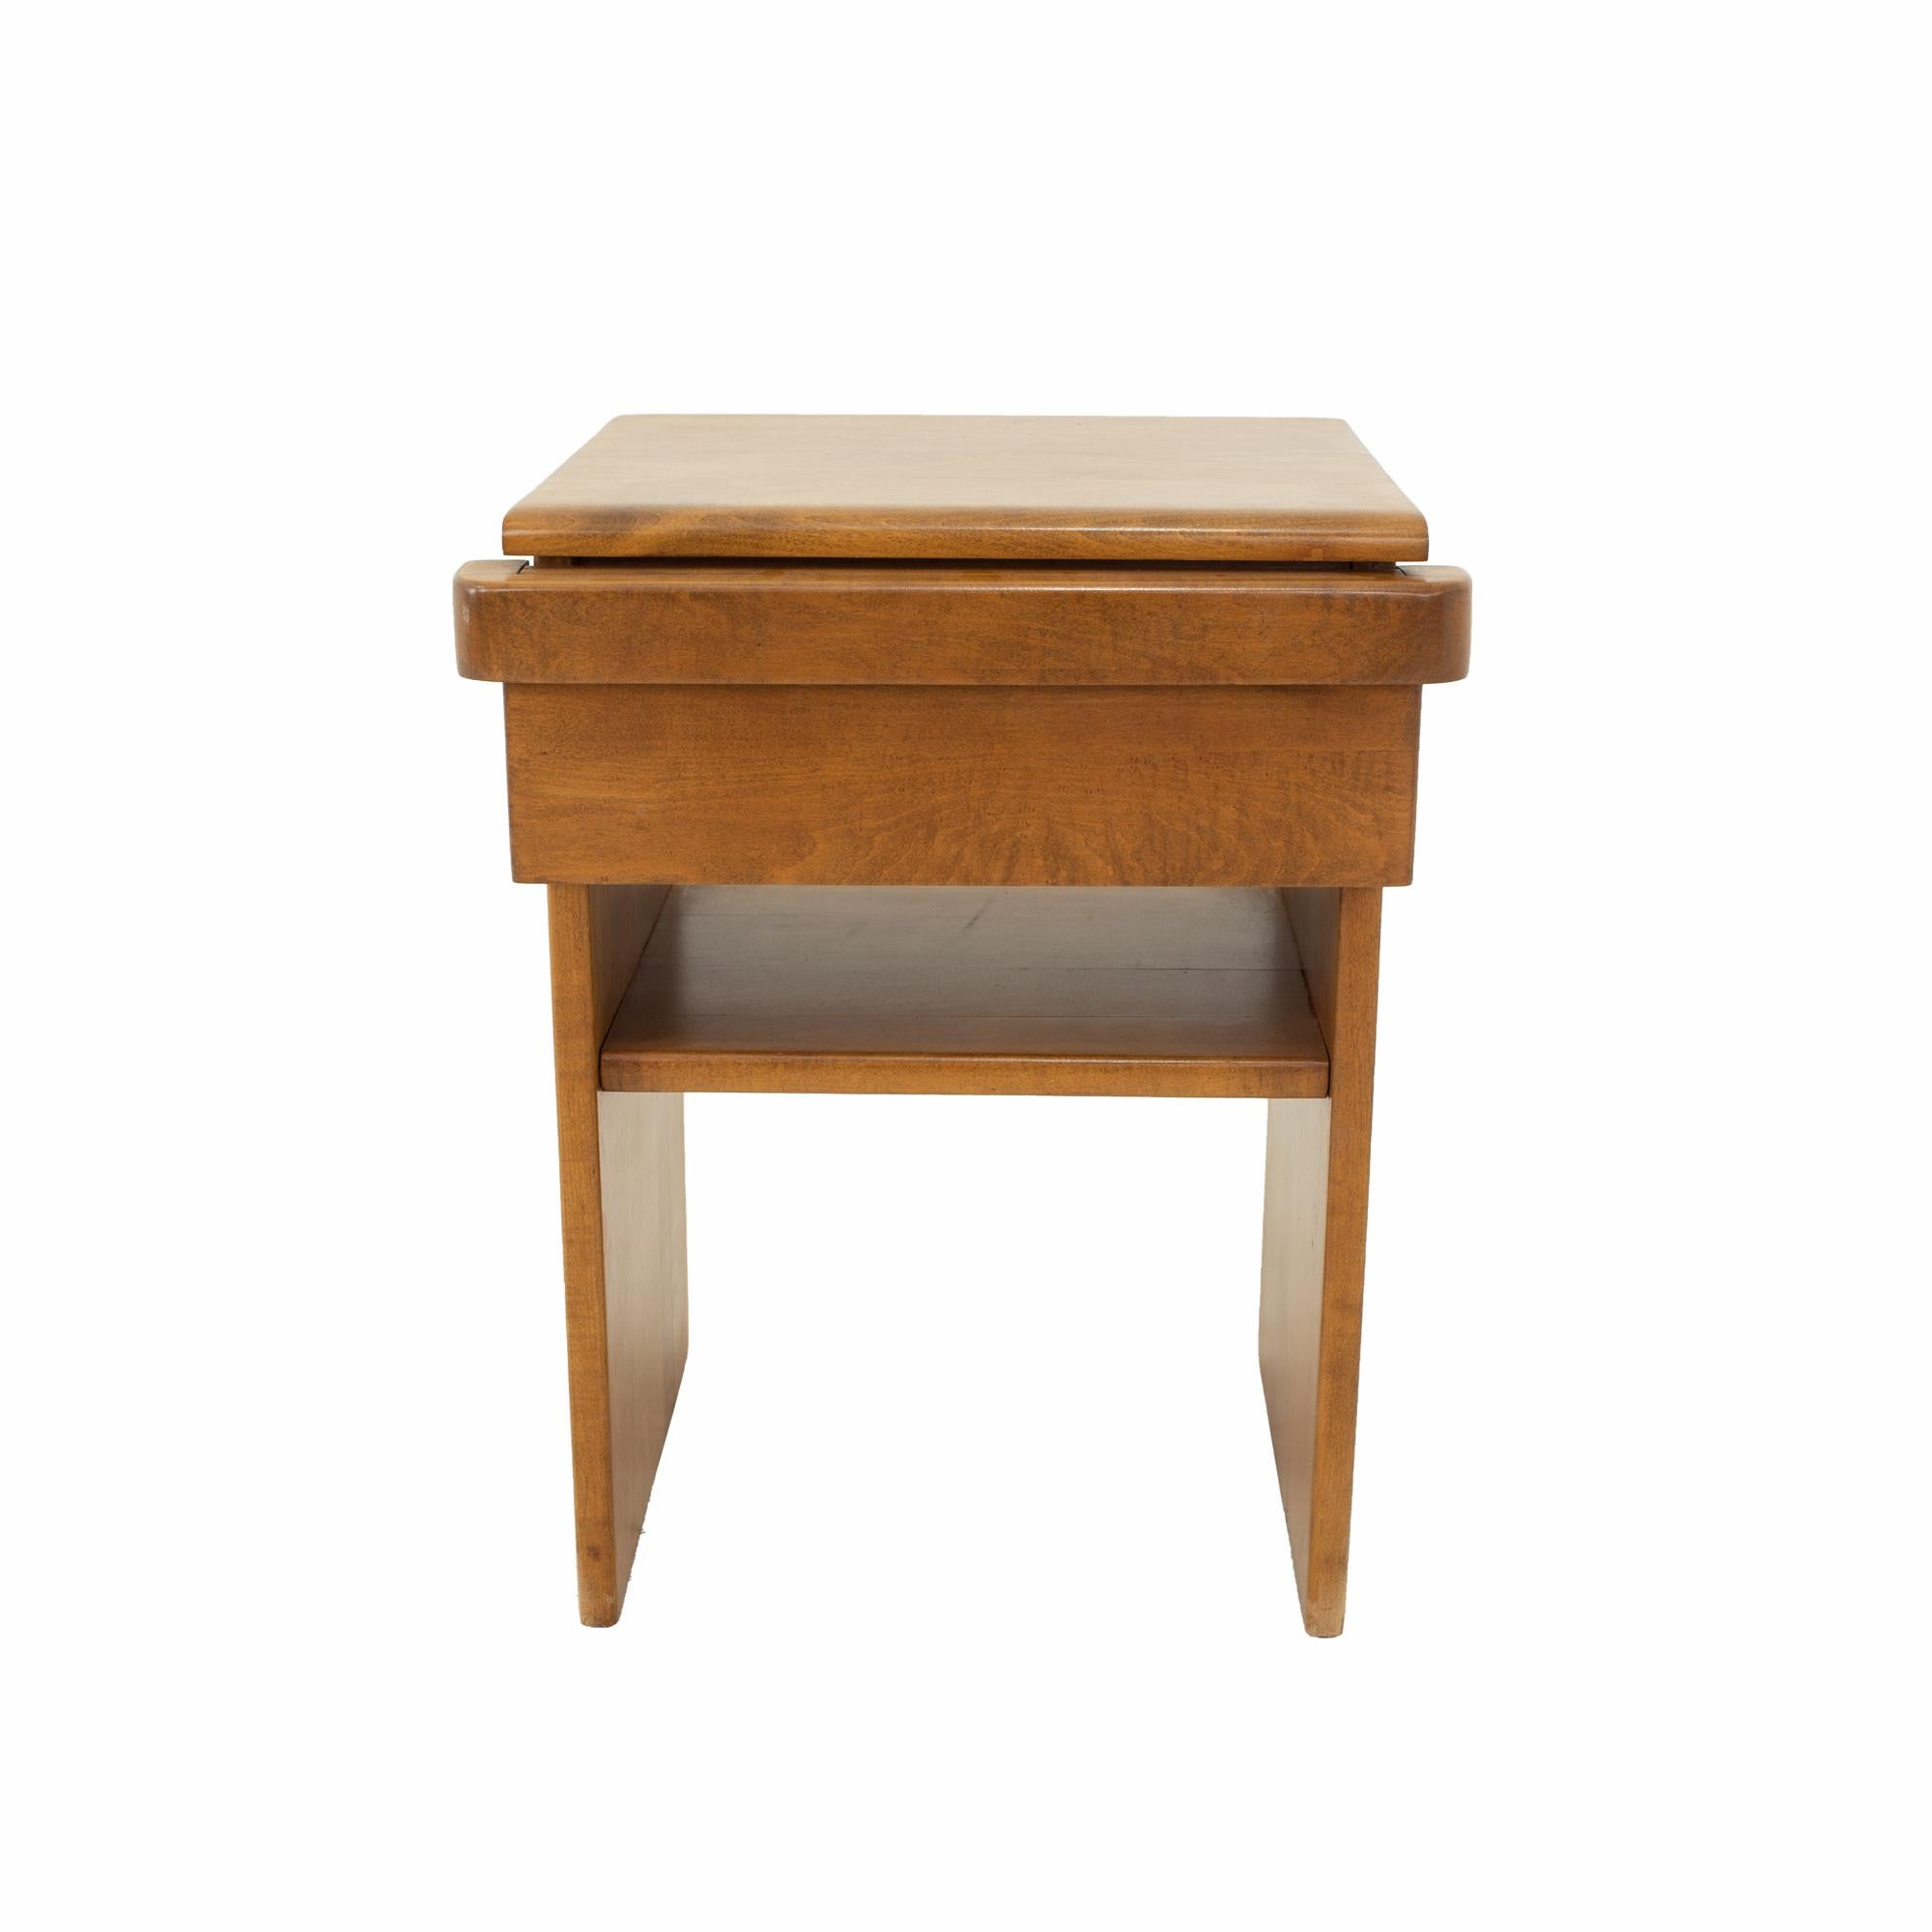 Russel Wright for Conant Ball Mid Century Side End Table Nightstand

Nightstand measures: 17.75 wide x 15.25 deep x 22.5 high

All pieces of furniture can be had in what we call restored vintage condition. That means the piece is restored upon